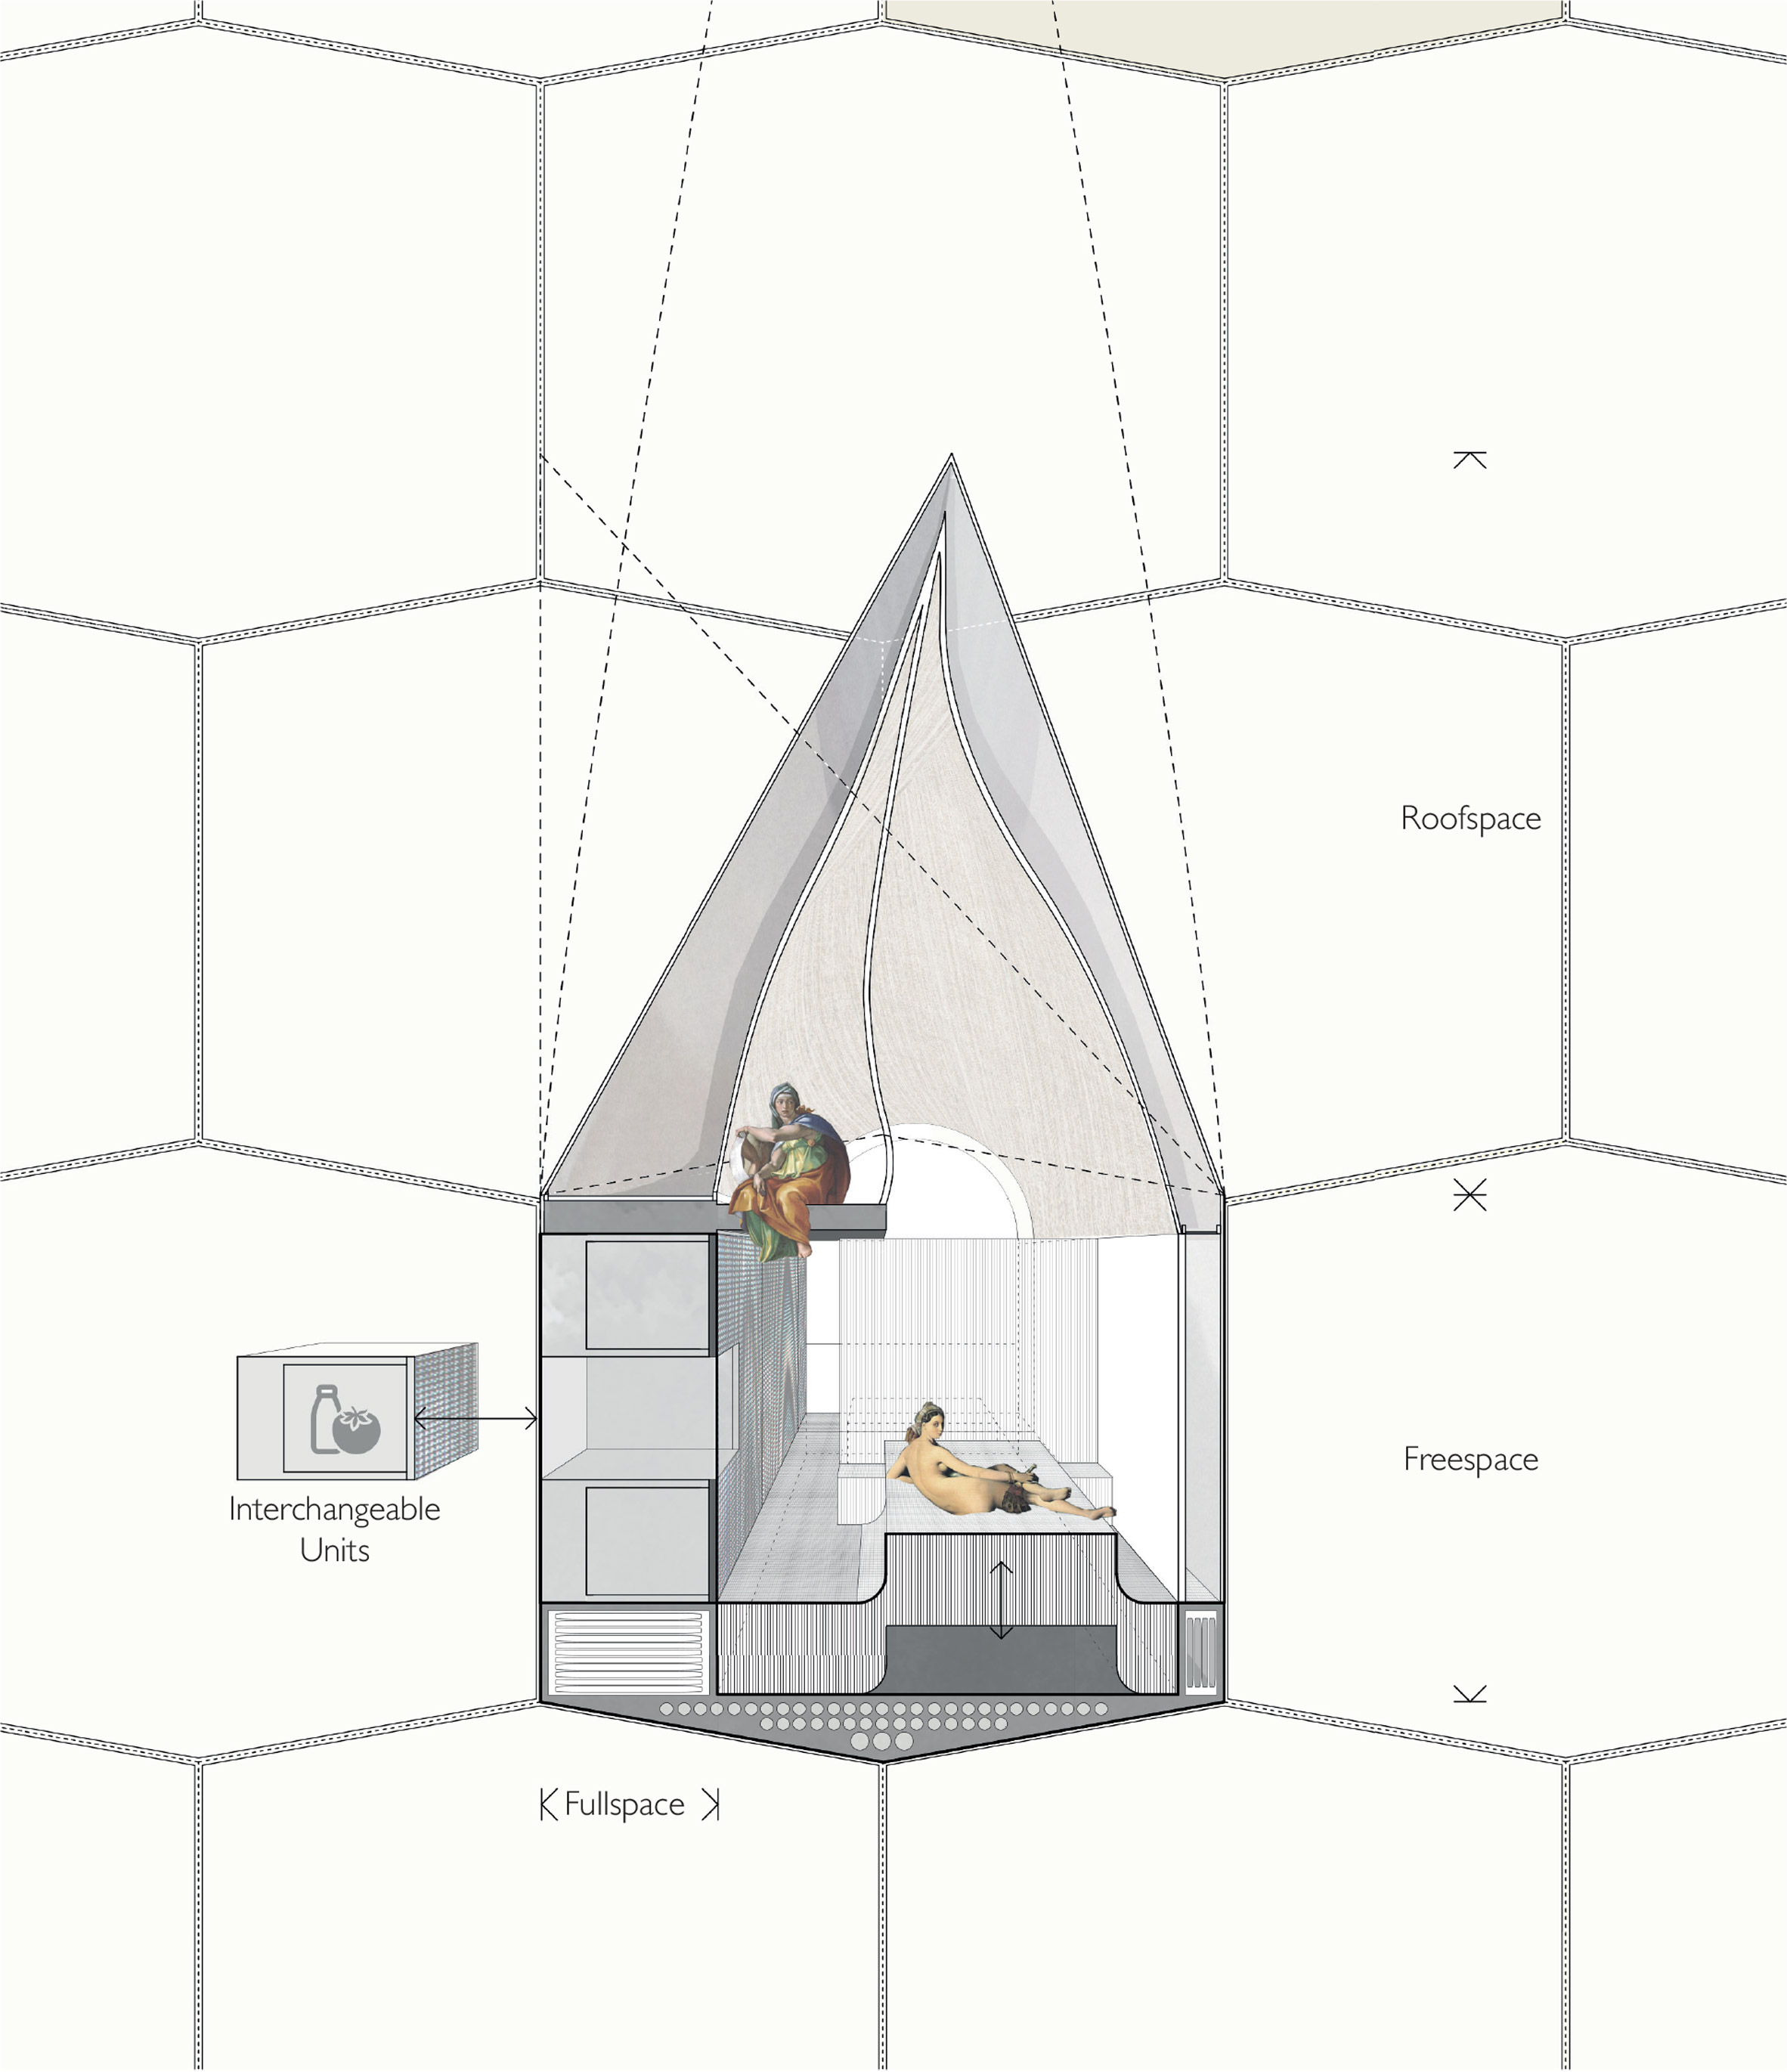 Hour Glass flying houses concept by Studio McLeod and Ekkist